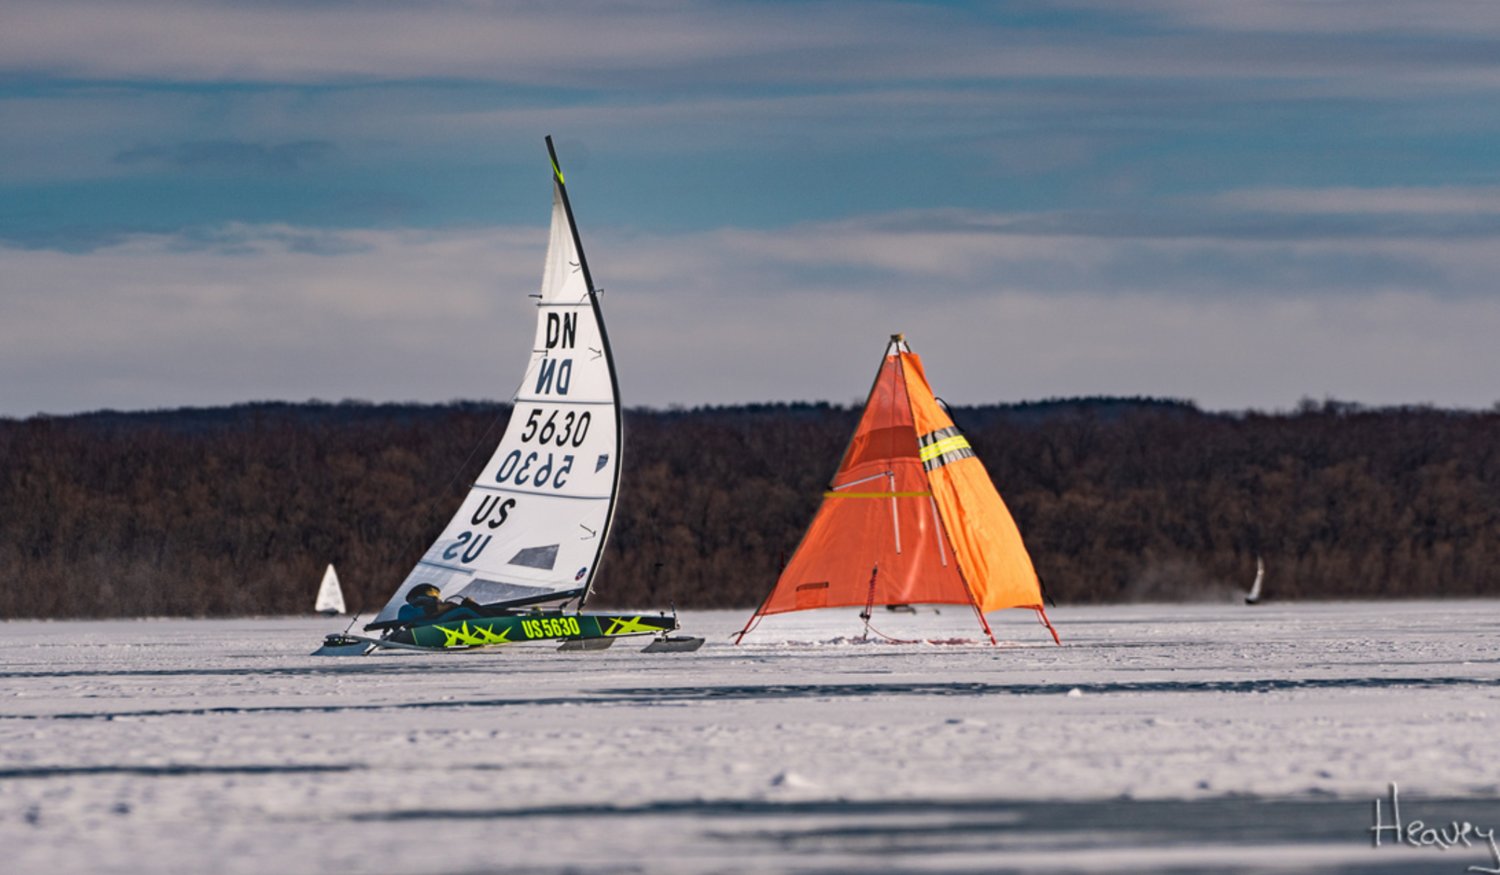 Karen Binder approaches a mark rounding at the 2022 DN US Nationals. “I'm going about 50 mph and actually accelerate to about 55 when I ease my sail to go around the mark,” Binder said. “It's a slight bear away and then I sheet back in to make sure my mast bends to force the boat and runners down so I don't spin out or lose control going downwind.”